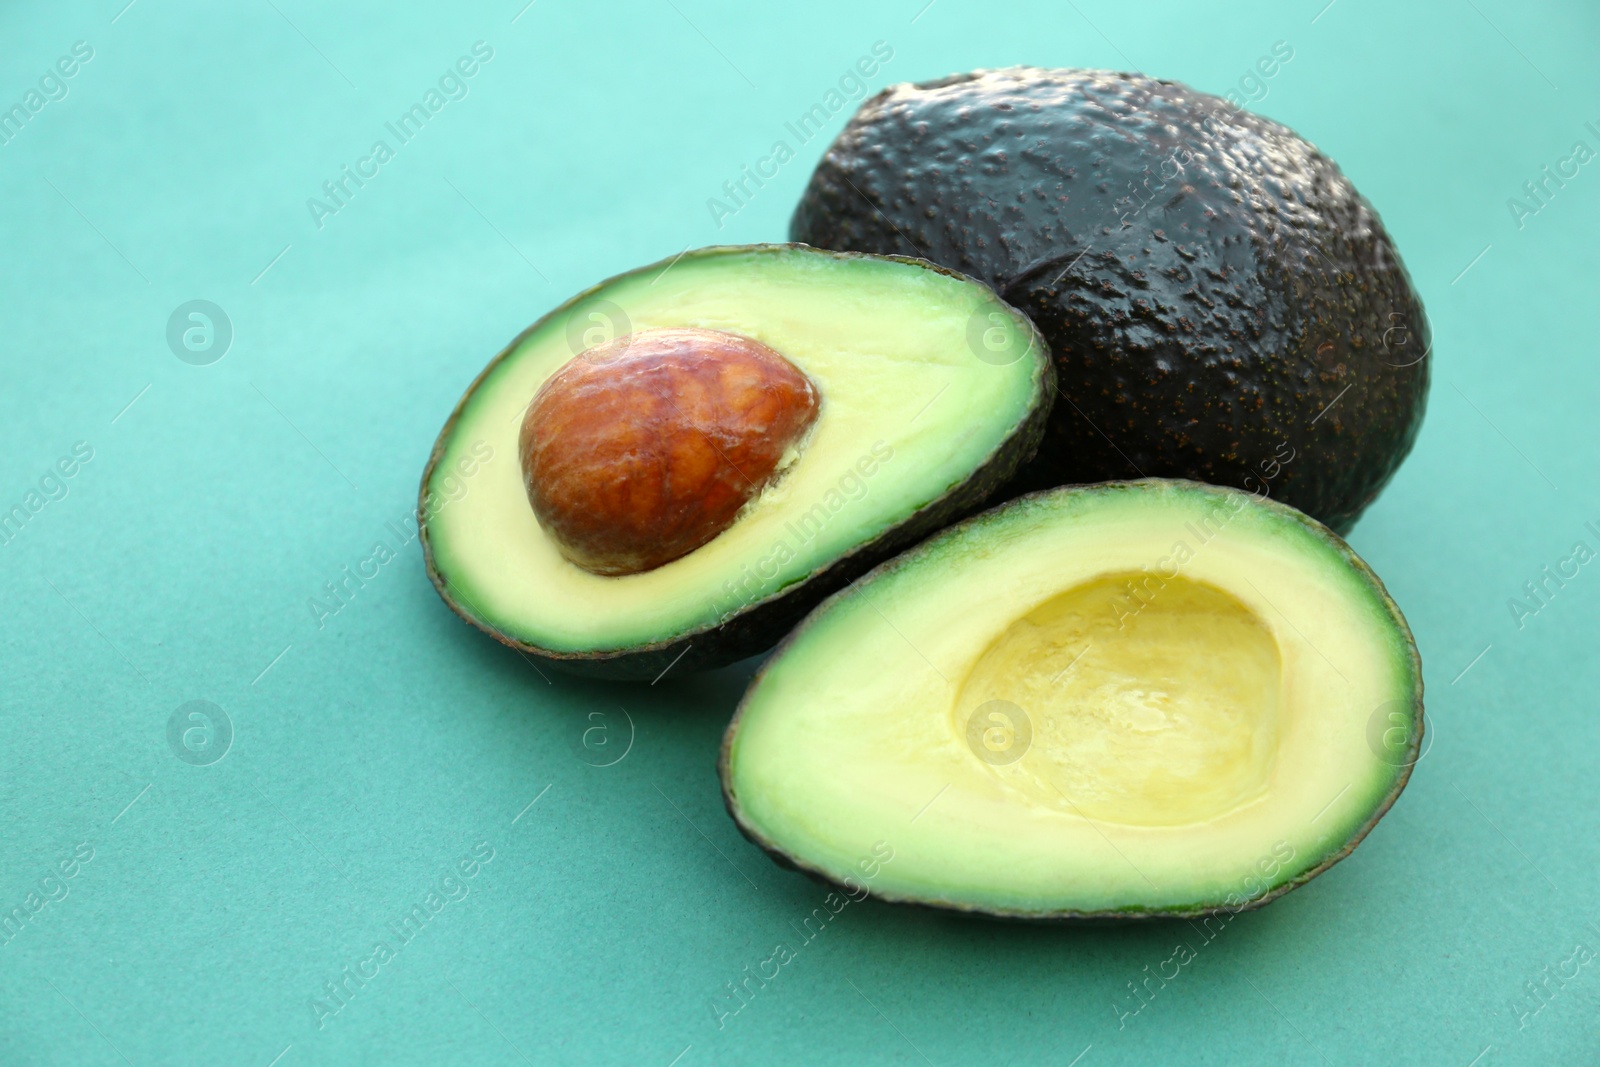 Photo of Tasty whole and cut avocados on turquoise background